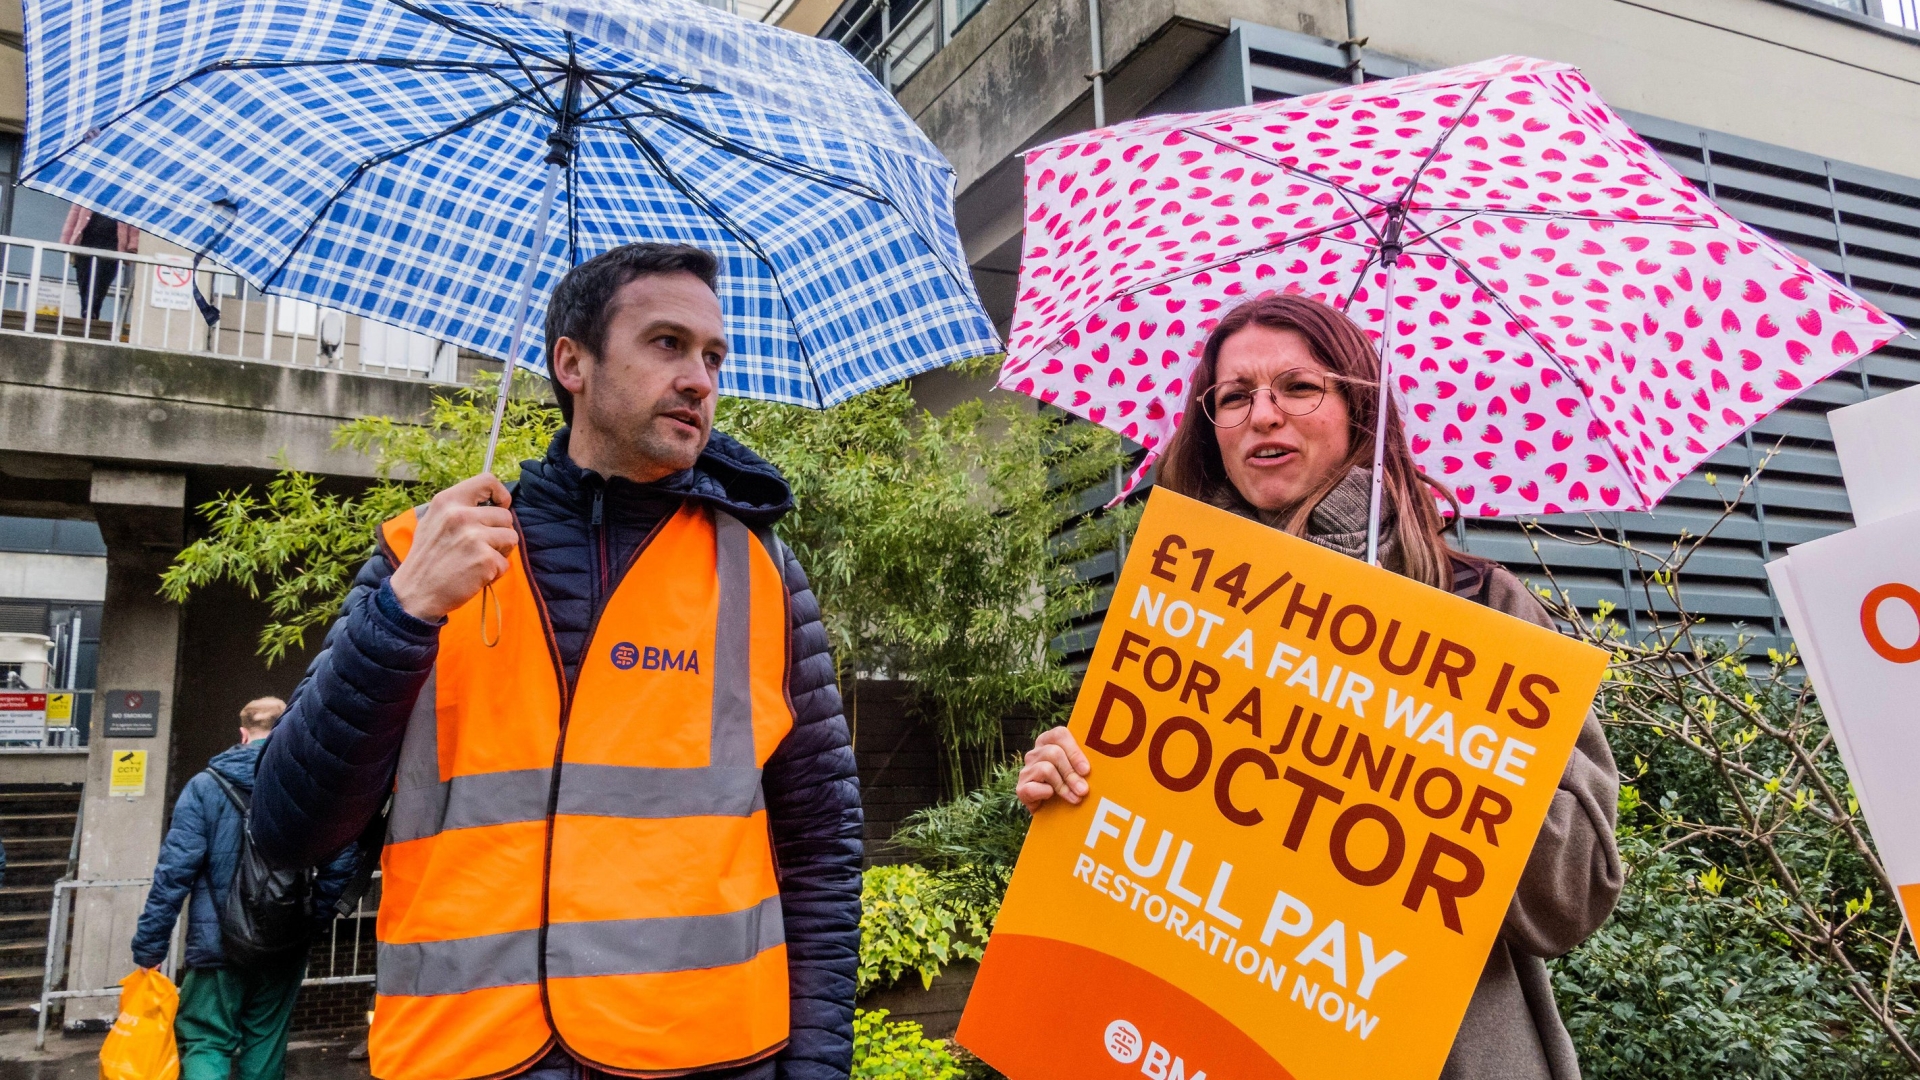 Over 200,000 appointments and operations cancelled in last week’s doctors’ strike